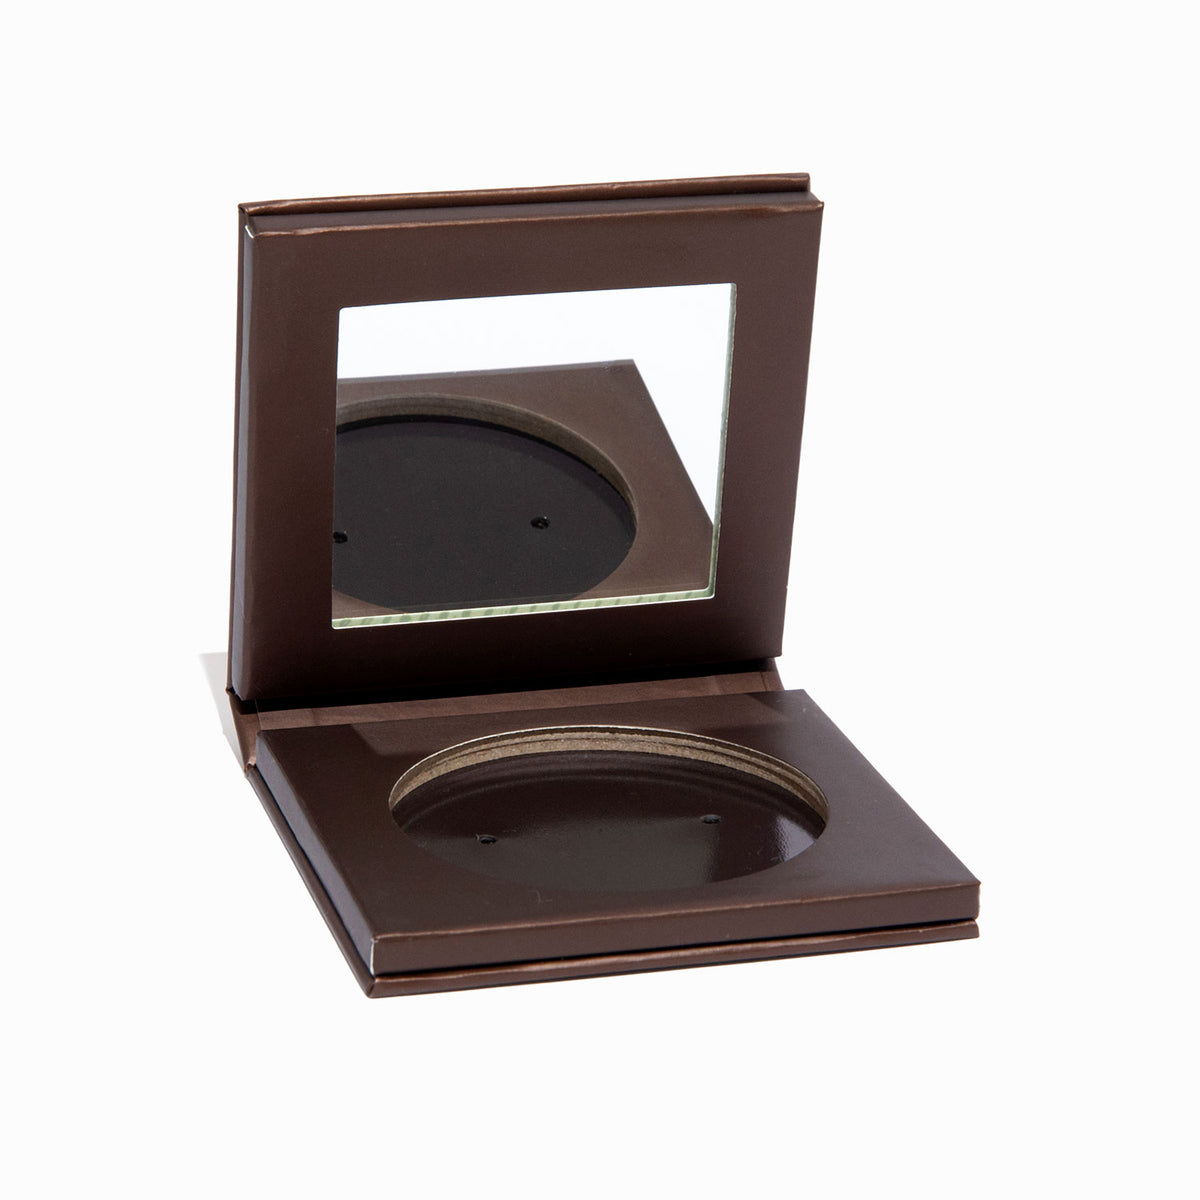 Foundation Compact